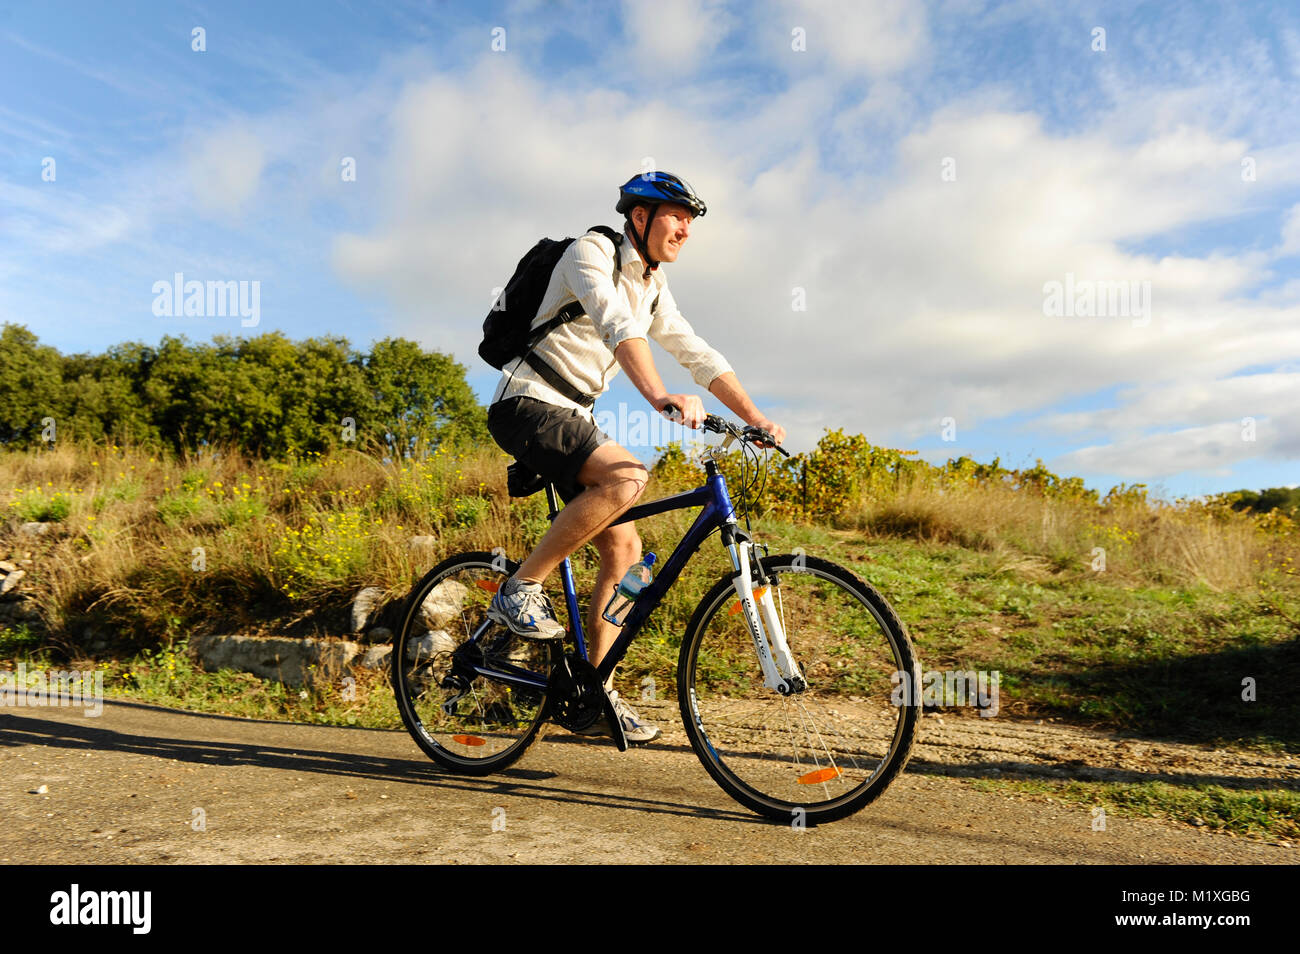 Mid adult man riding a bicycle in Vaucluse, France Stock Photo